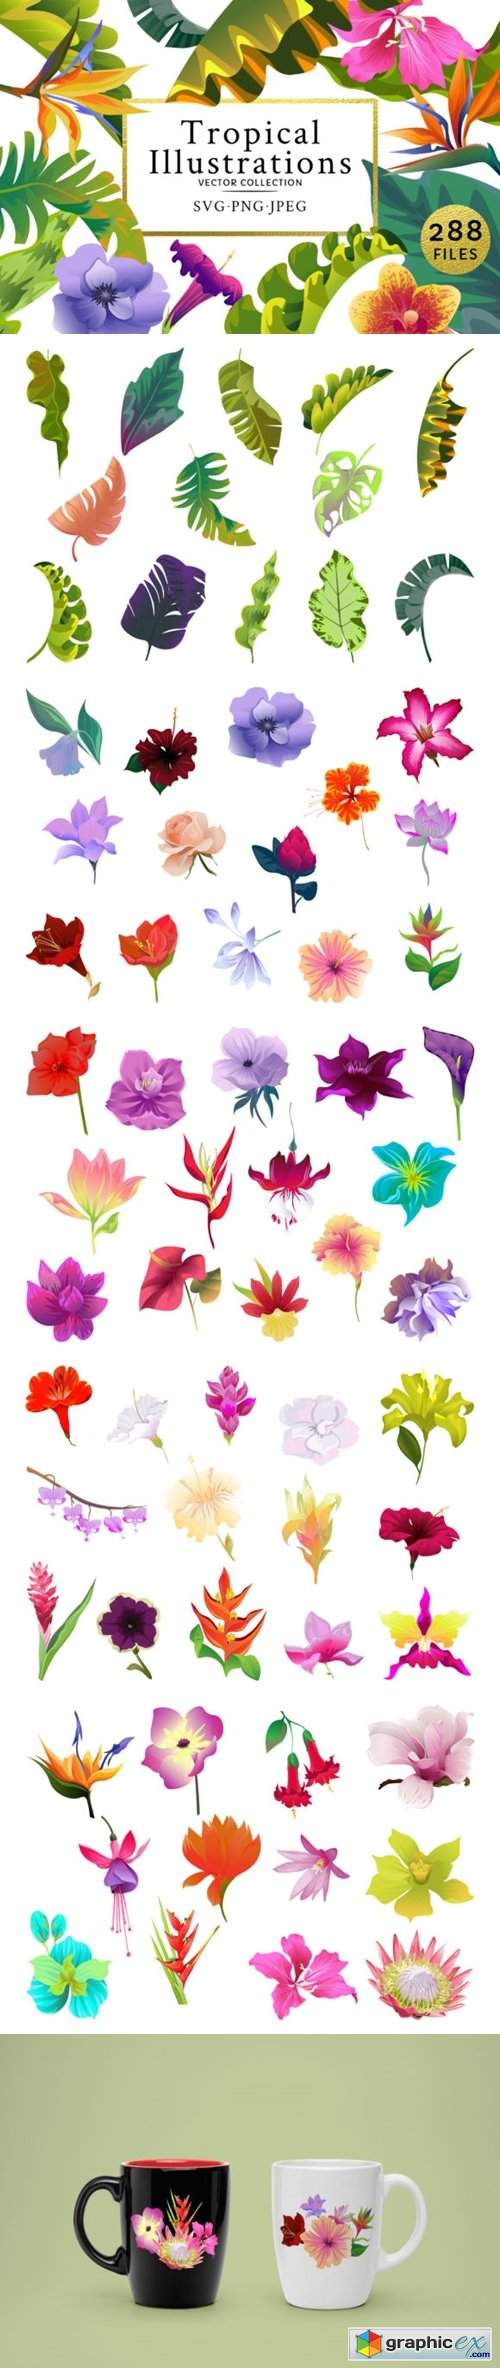  Flowers Tropical Illustration Pack Water 